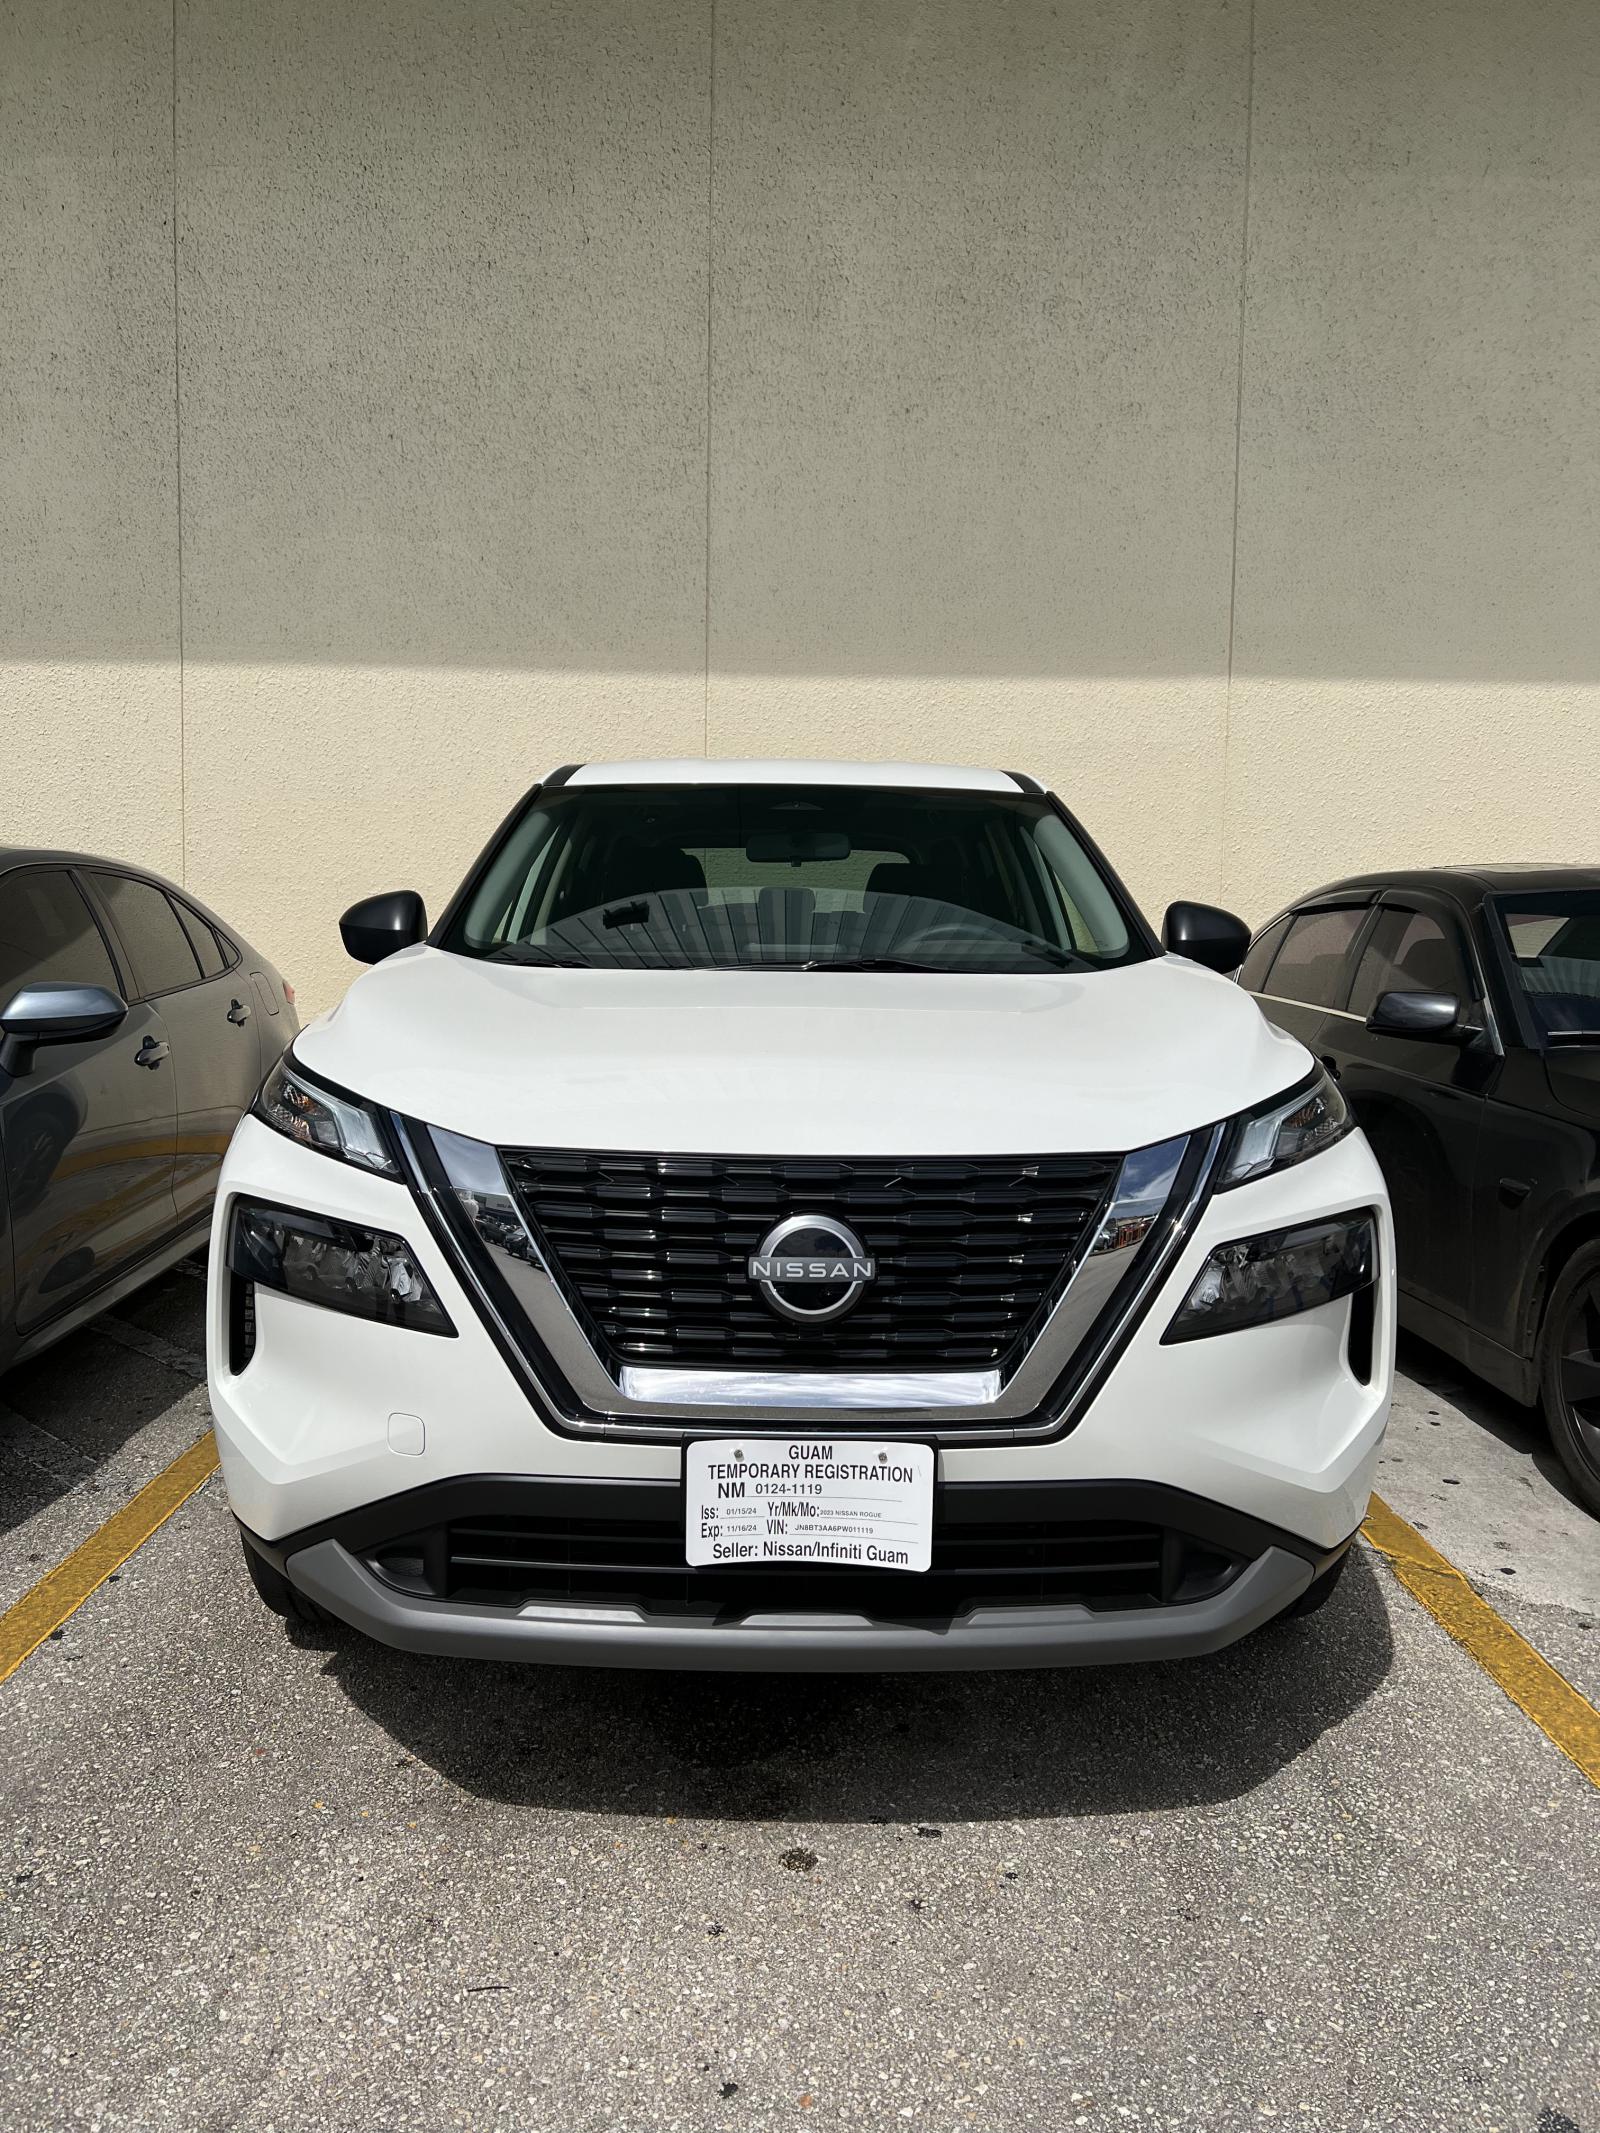 My first trip to Guam was fun and comfortable thanks to Nissan rental car. It was nice that the pick-up and return was done at the airport, and I was happy to get a new car with 14 miles on it. I will use it again next time.